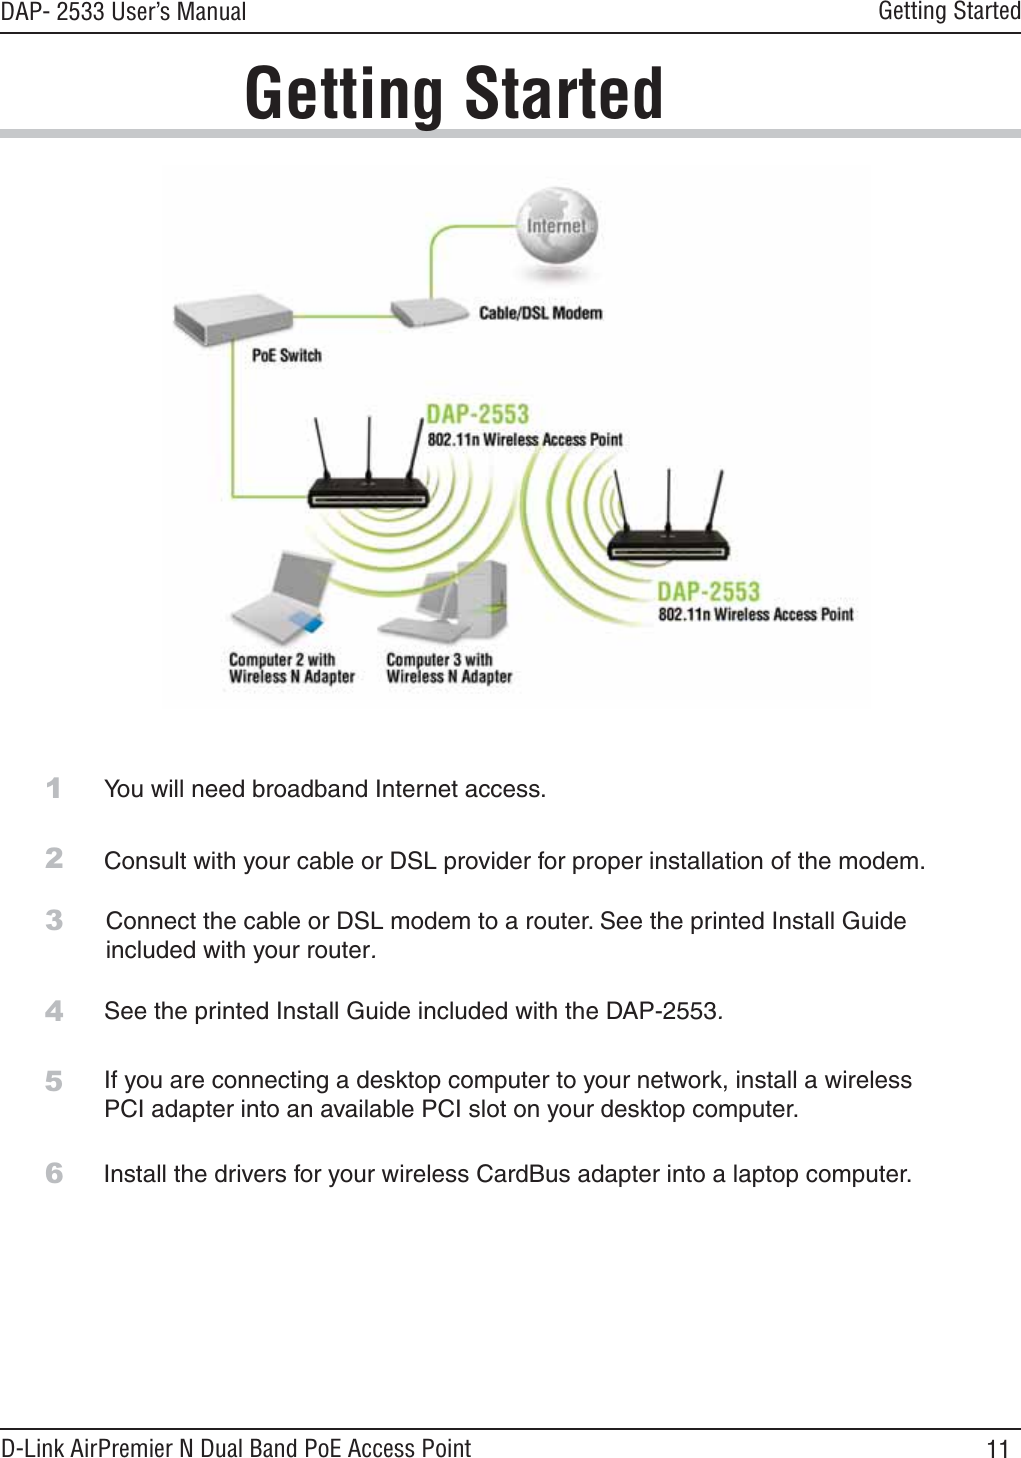 11DAP- 2533 User’s ManualD-Link AirPremier N Dual Band PoE Access PointGetting StartedConsult with your cable or DSL provider for proper installation of the modem.Connect the cable or DSL modem to a router. See the printed Install Guideincluded with your router.If you are connecting a desktop computer to your network, install a wirelessPCI adapter into an available PCI slot on your desktop computer.Install the drivers for your wireless CardBus adapter into a laptop computer.See the printed Install Guide included with the DAP-2553.23456You will need broadband Internet access.1Getting Started